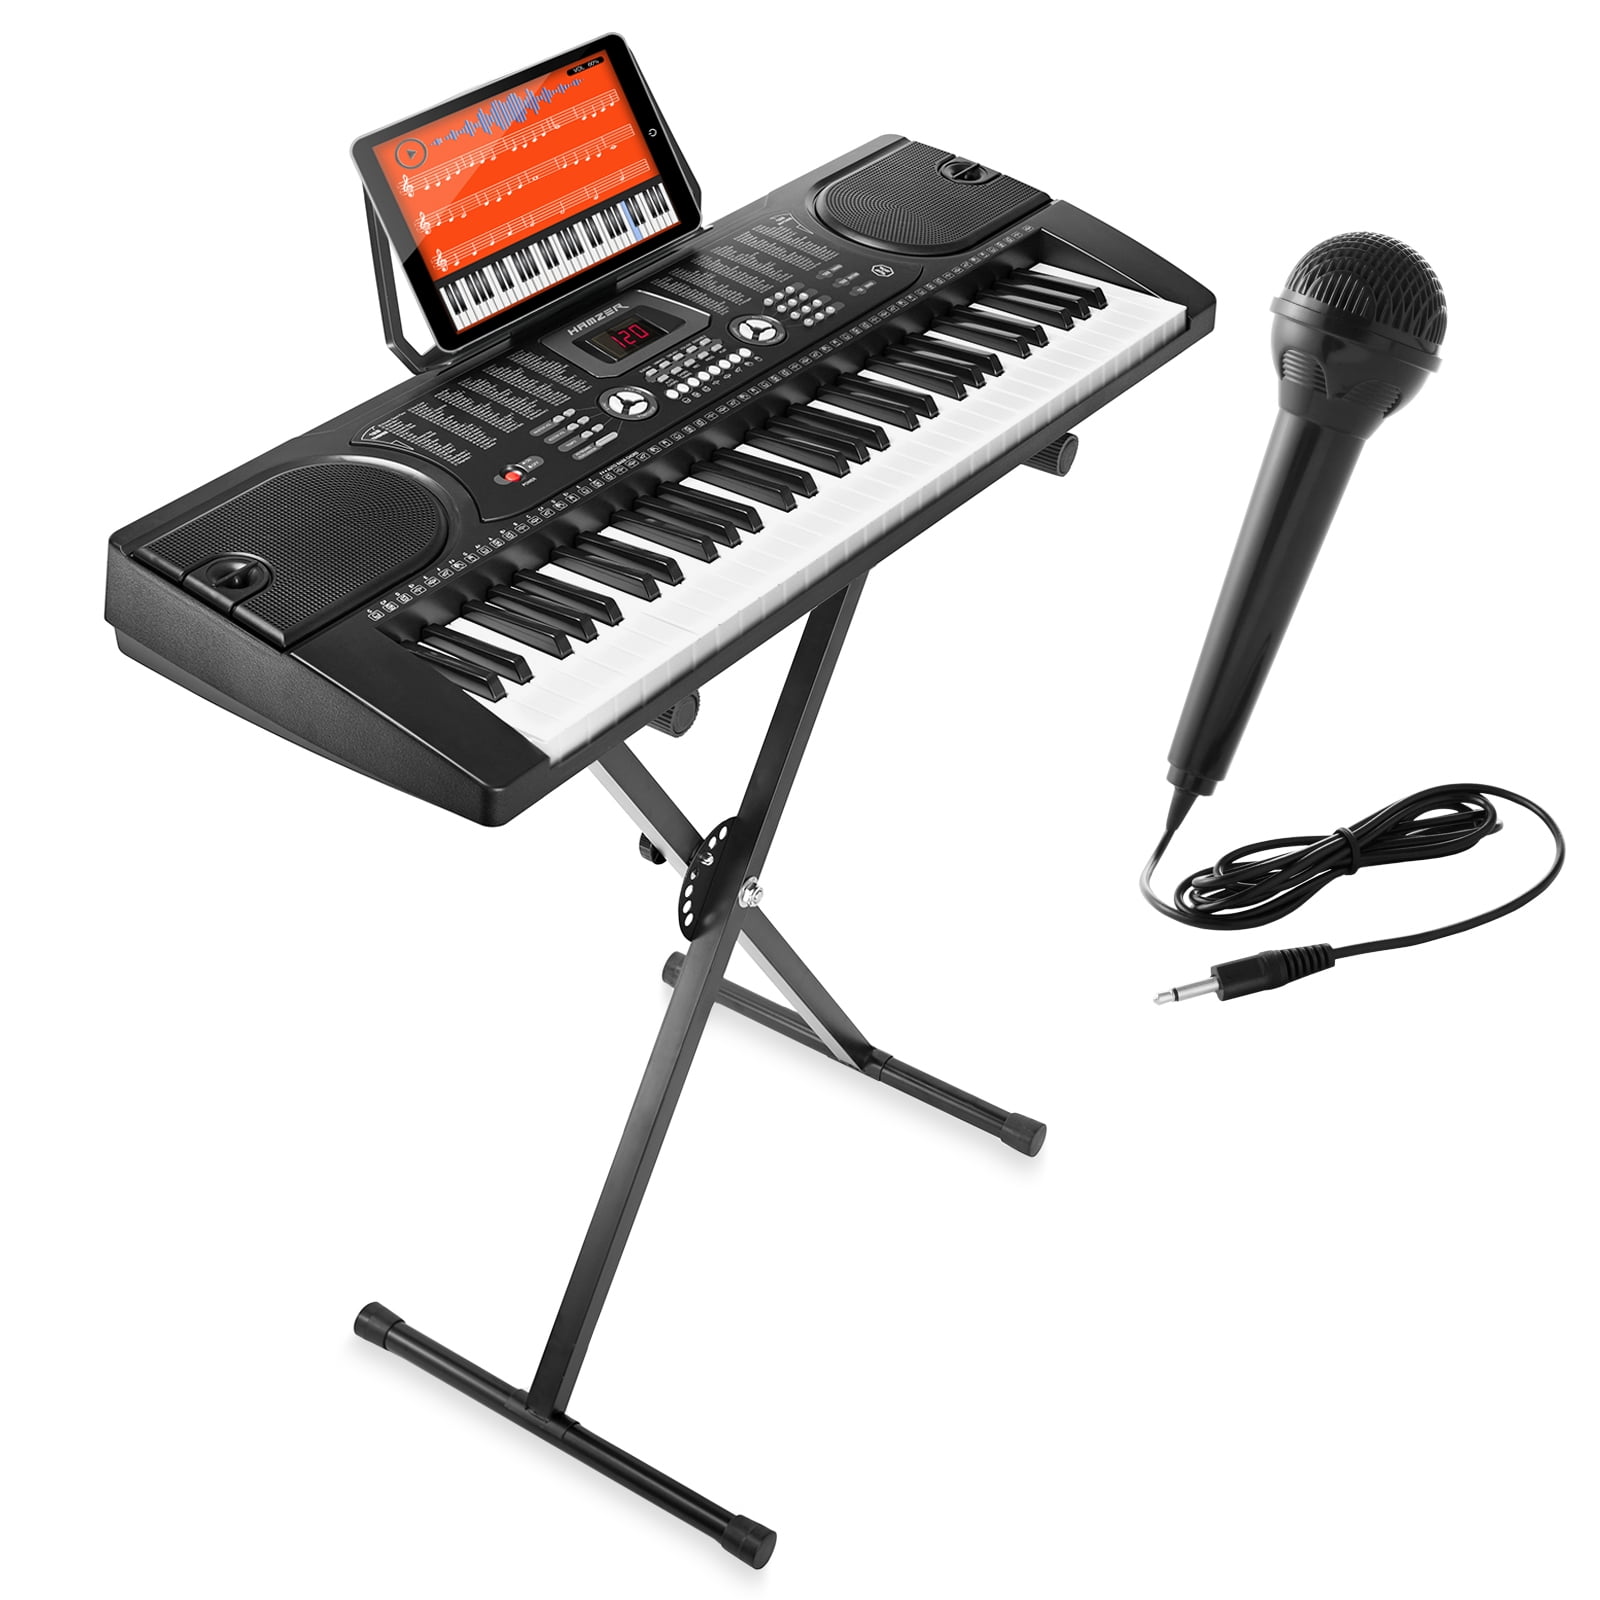 CHUYANG Electric Keyboard Piano 61-Key with Microphone & Music Stand Portable Electronic Kids Piano Keyboard ，USB Port & Teaching Modes for Beginners 